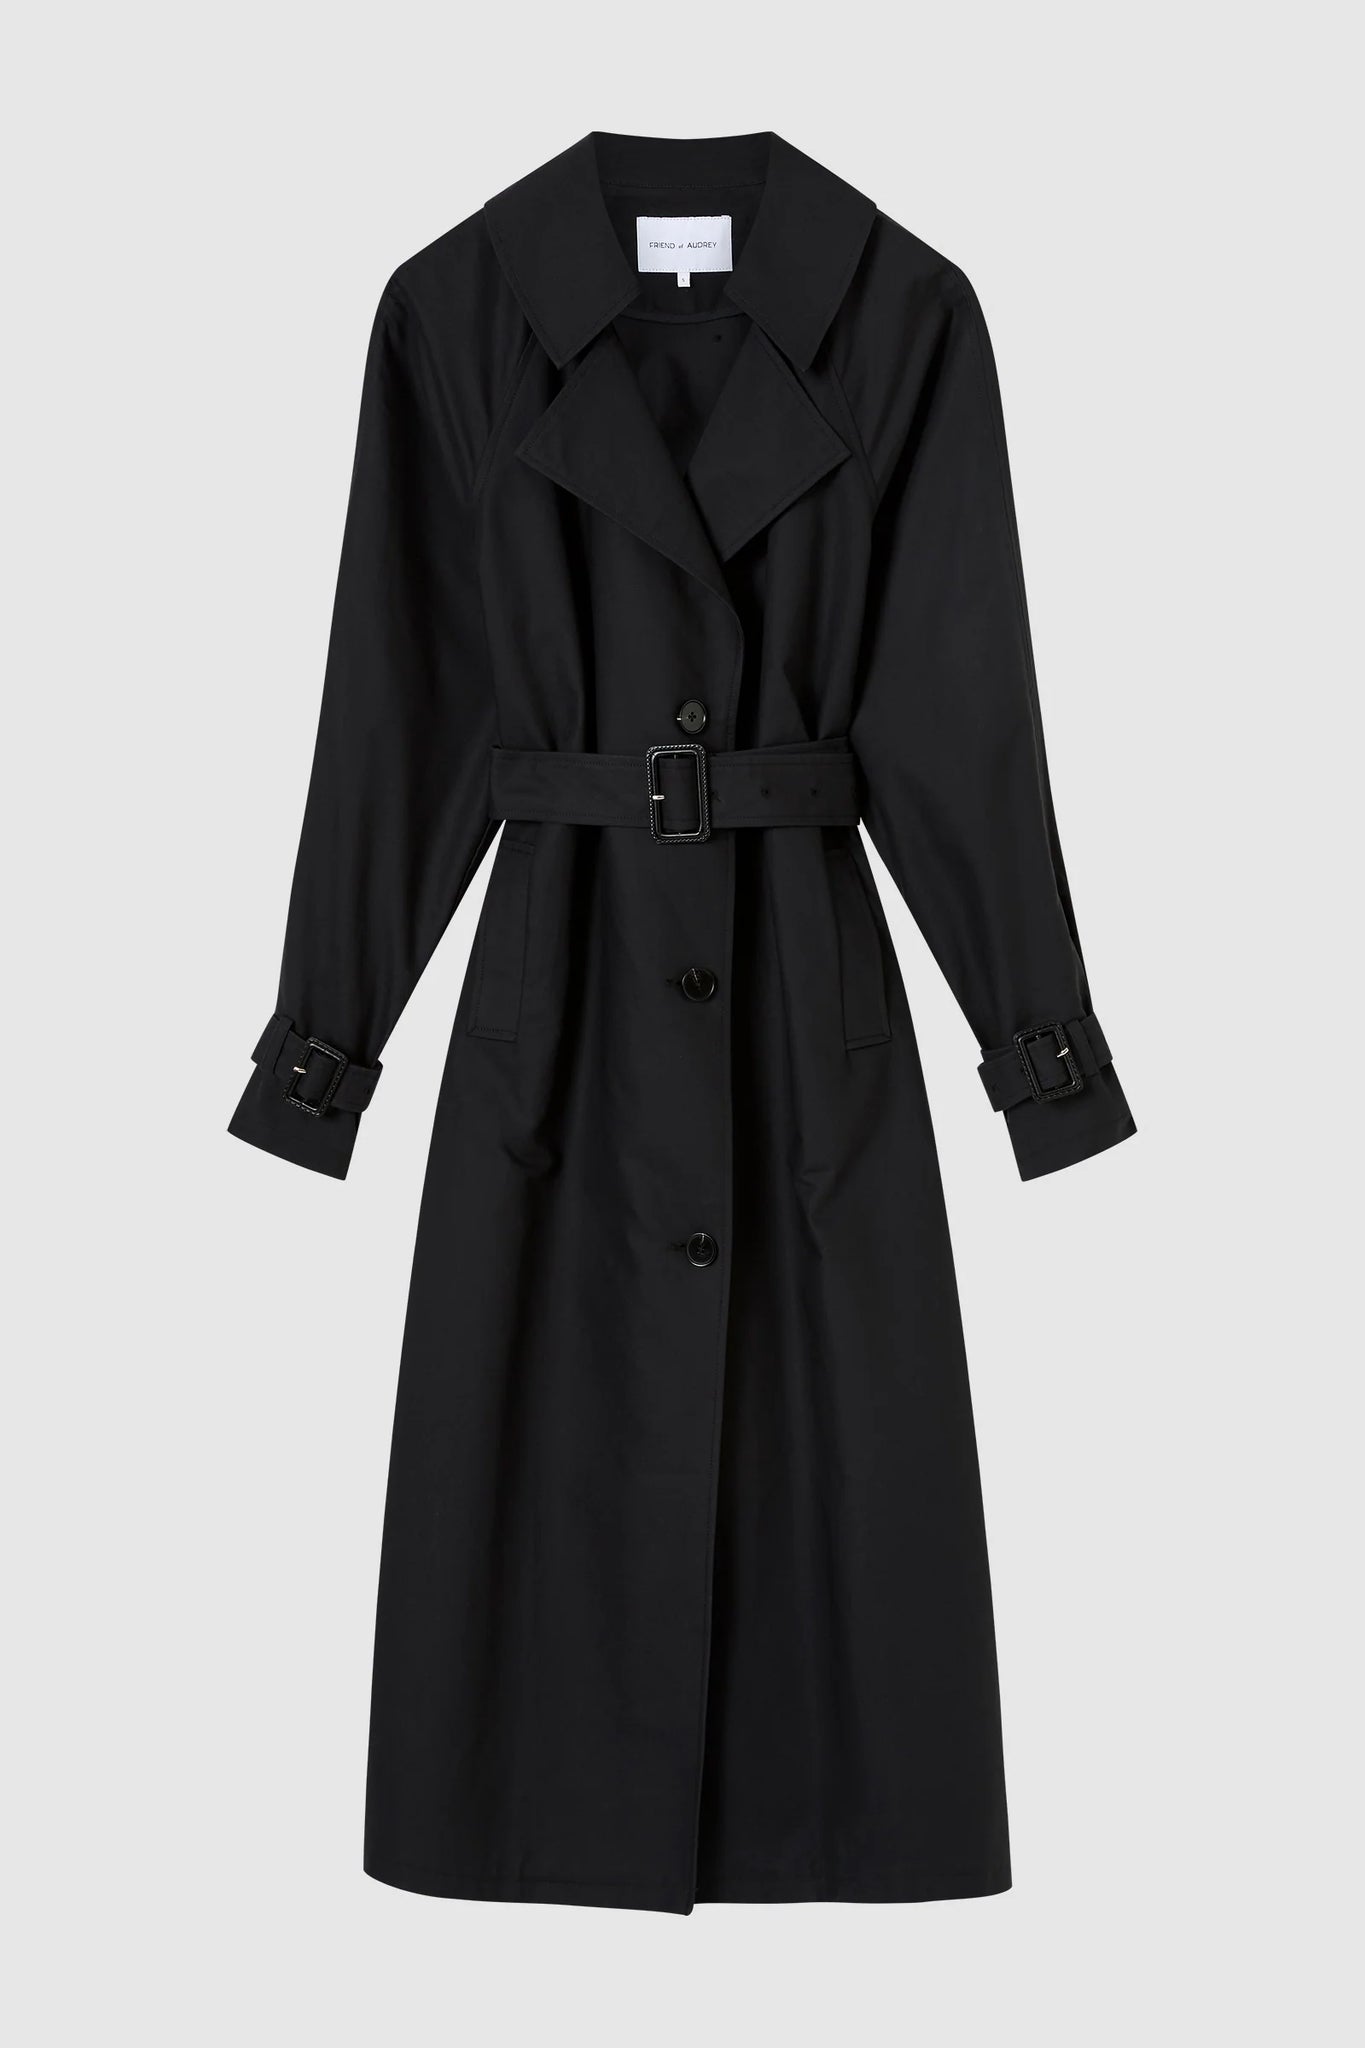 Friend of Audrey Browne Oversized Trench Coat - Black